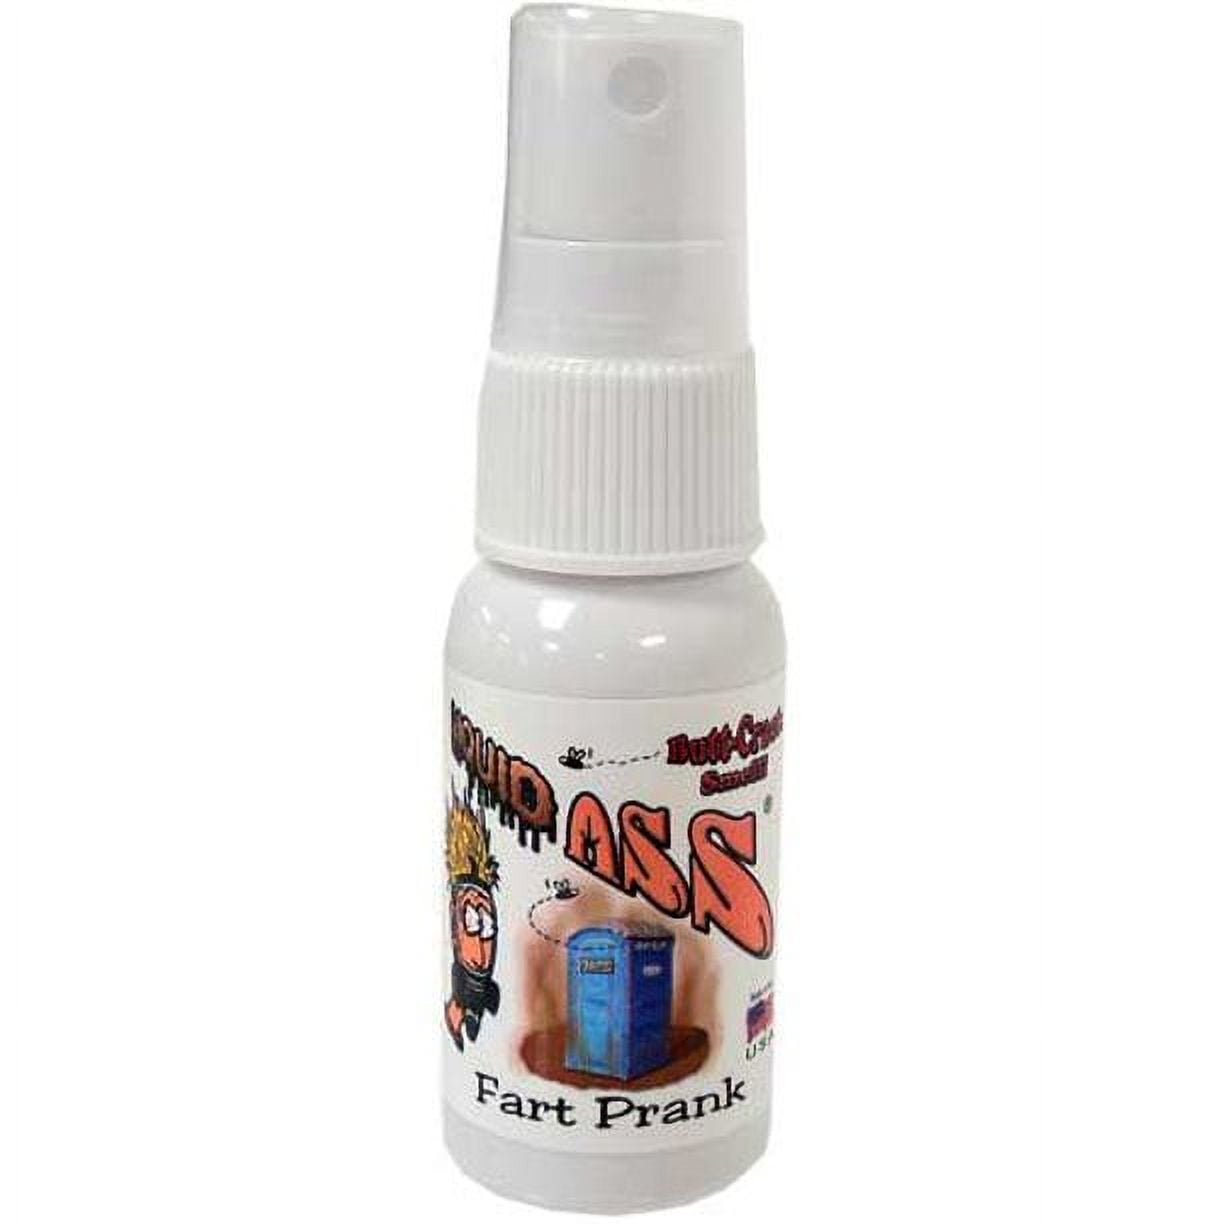 Liquid Ass Spray Mister Fart Prank Pooter Stink Bottle Smell Bomb - PRANK  GAG - Air Fresheners - South Russell, Ohio, Facebook Marketplace